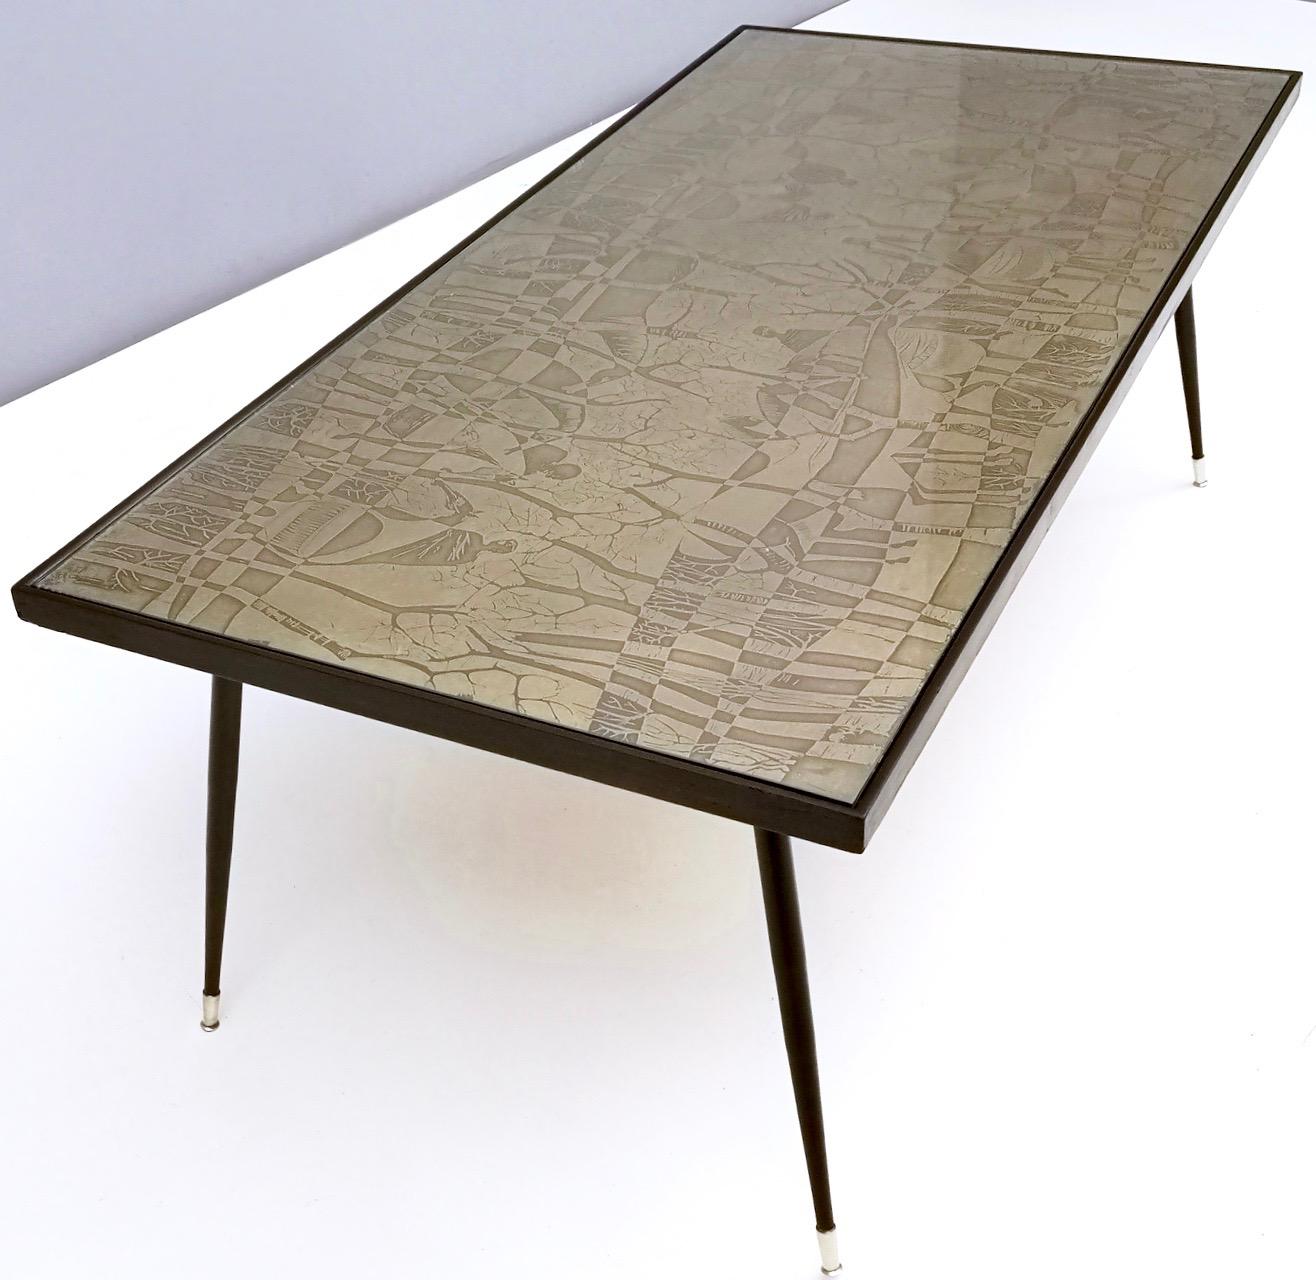 Elegant Vintage Rectangular Etched Brass Coffee Table by G.Urs, Italy In Excellent Condition For Sale In Bresso, Lombardy